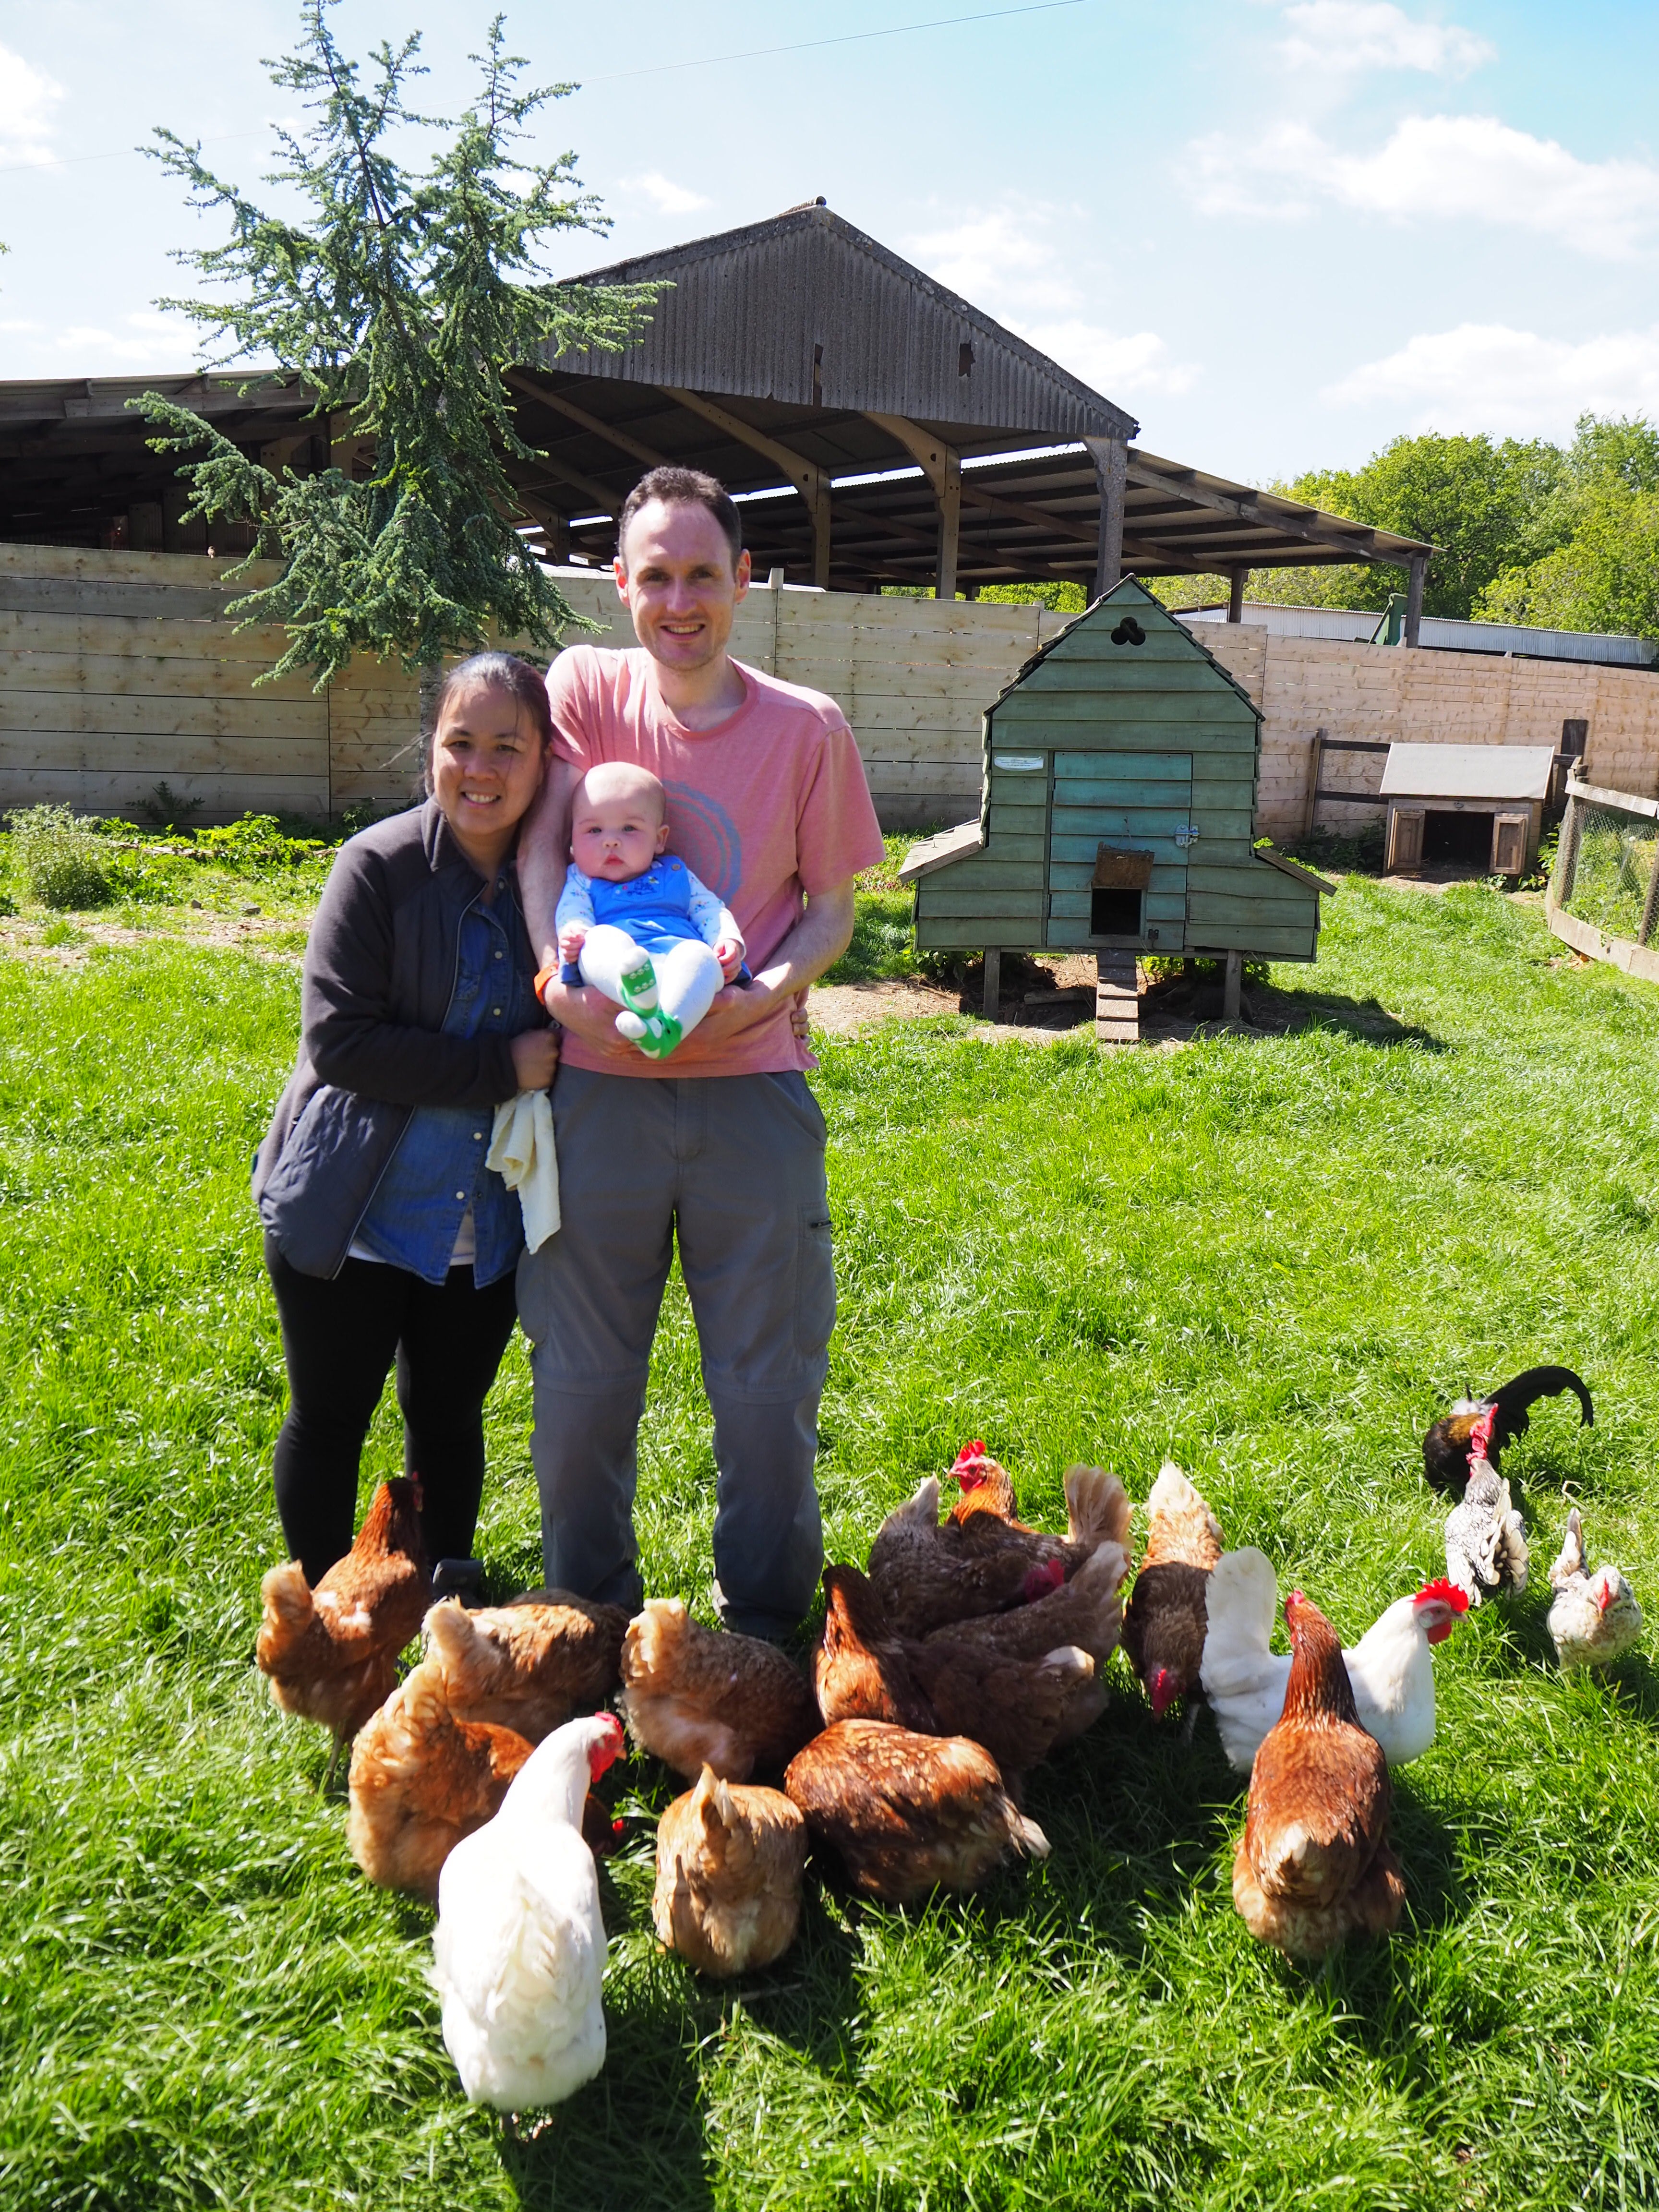 Meeting the chickens at Midgham Farm (Neil Lancefield/PA)